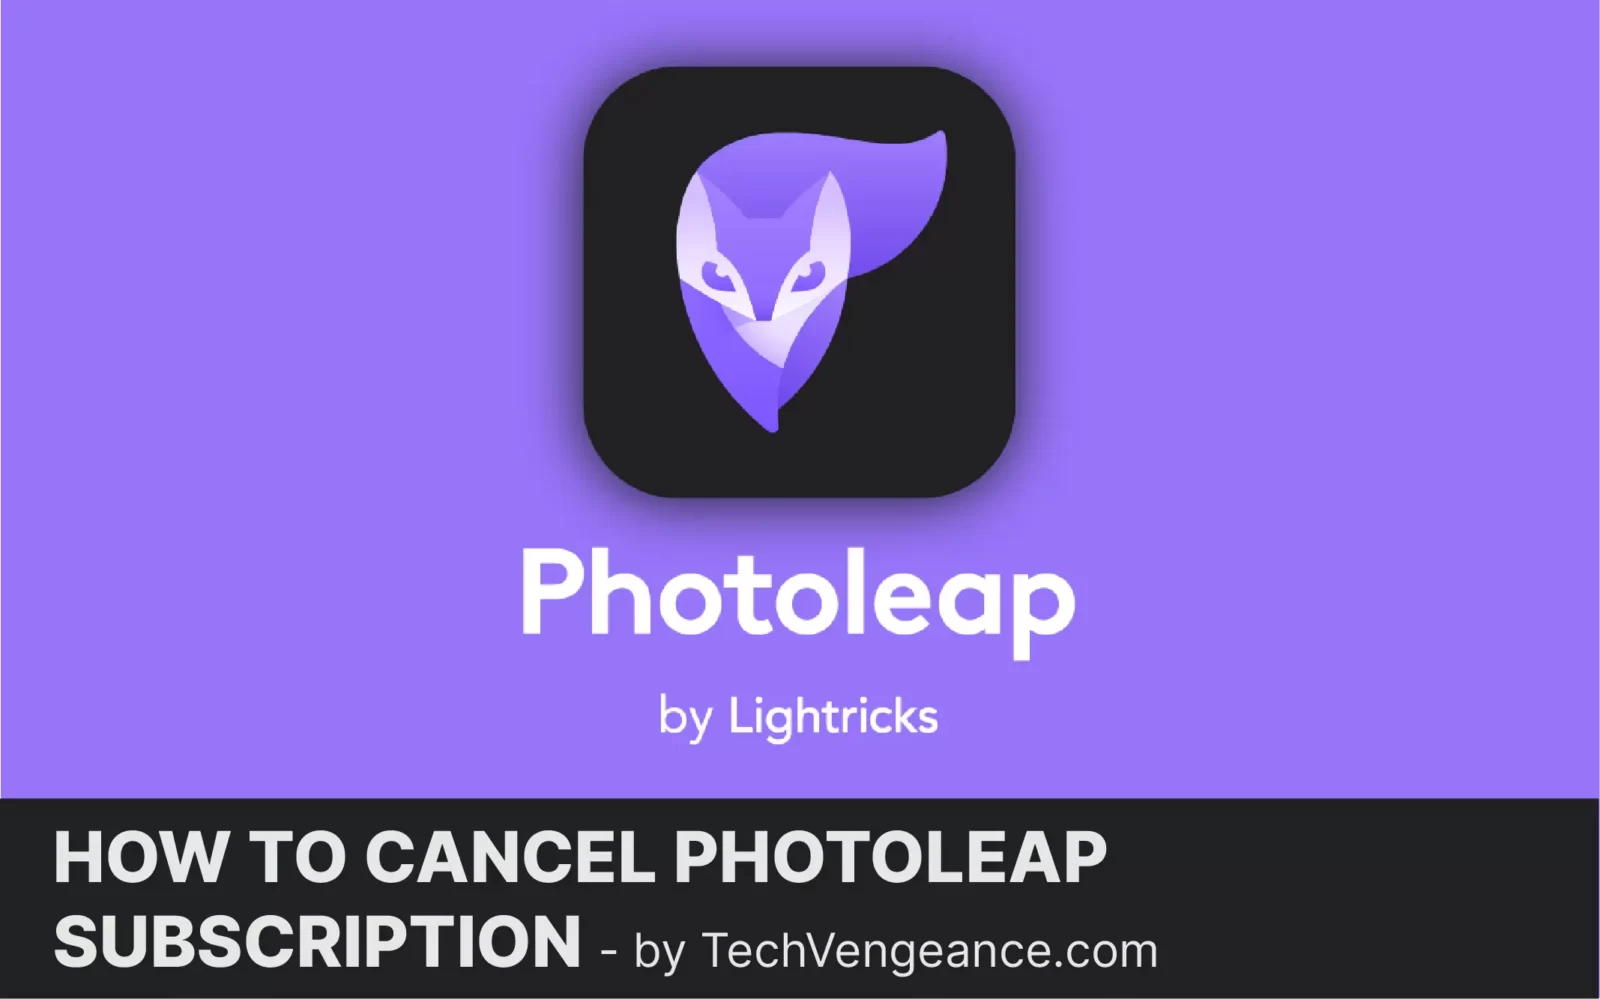 How To Cancel Photoleap Subscription